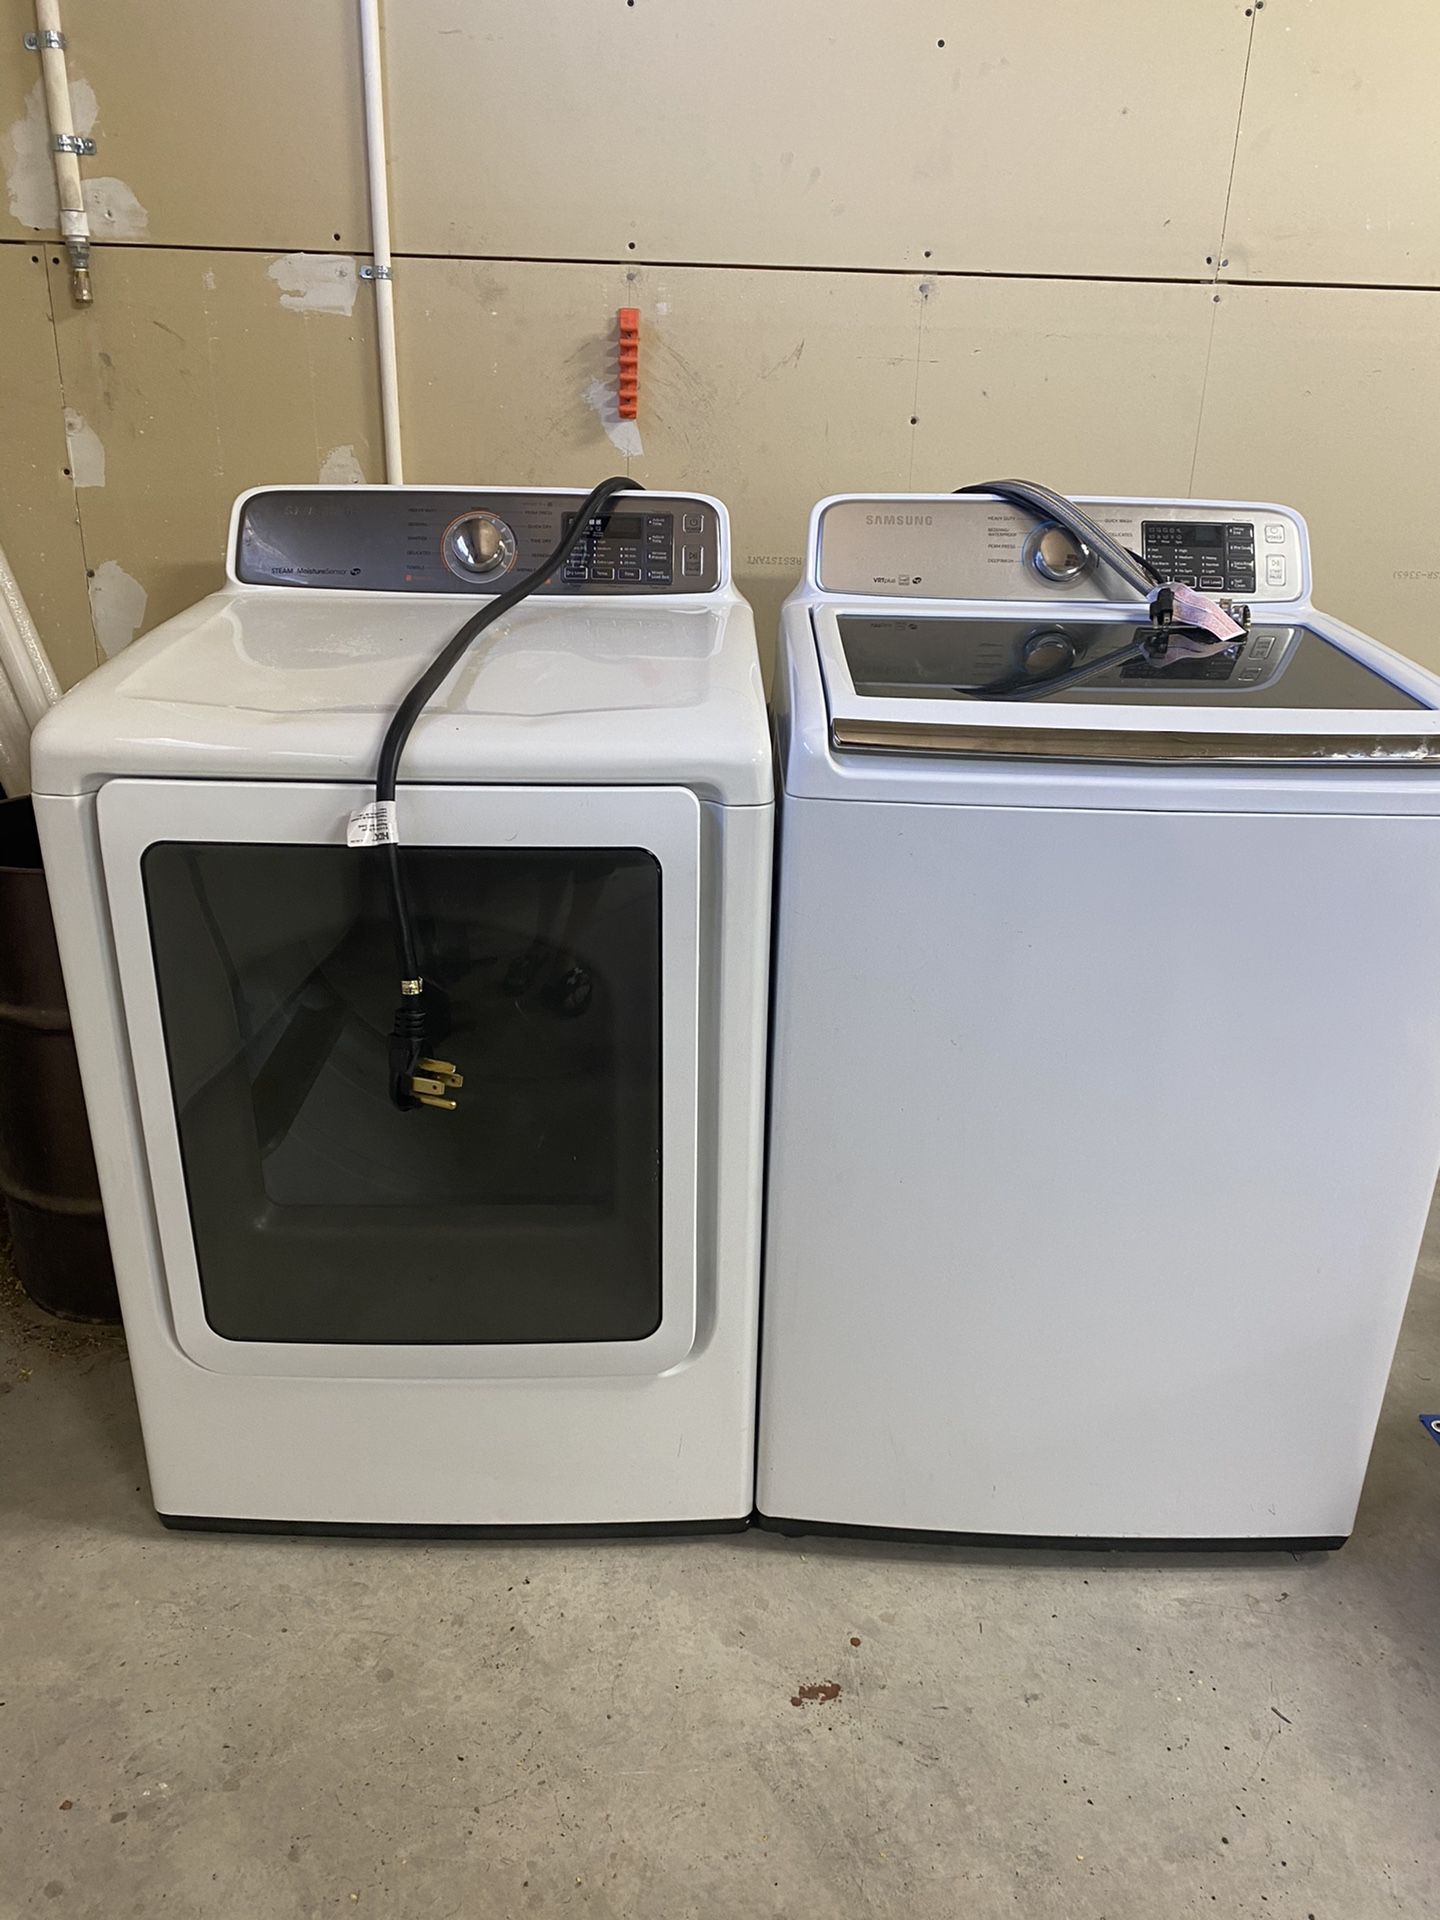 Samsung washer and dryer - 2 years old